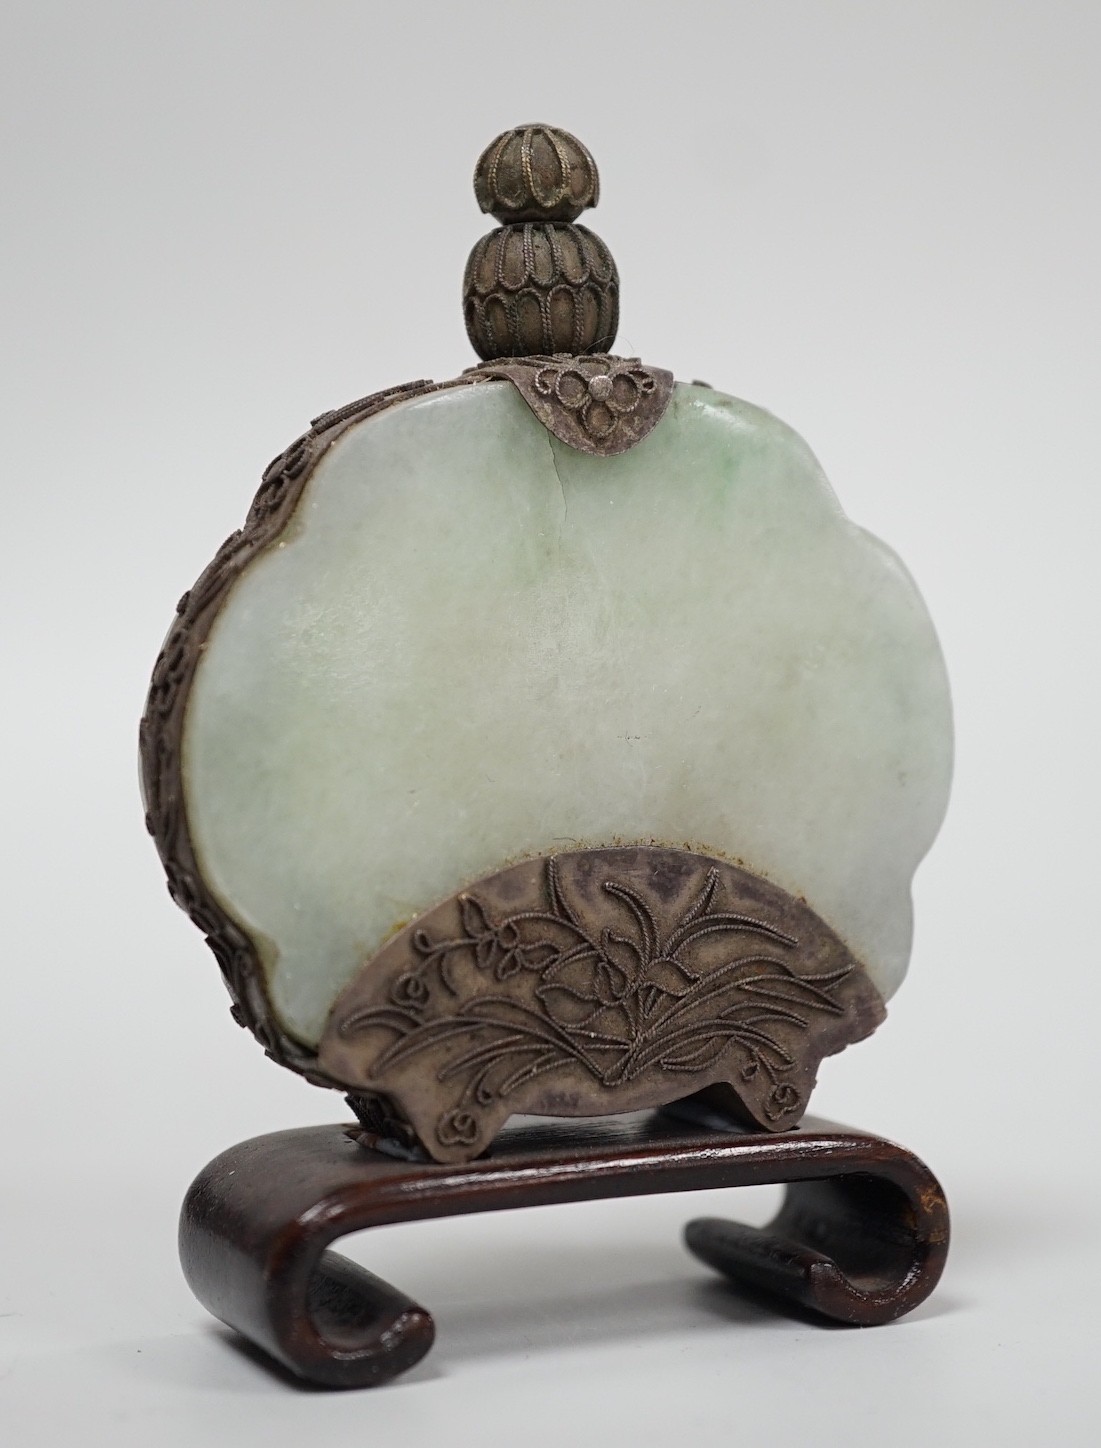 A Chinese jadeite and silver filigree mounted snuff bottle, 20th century